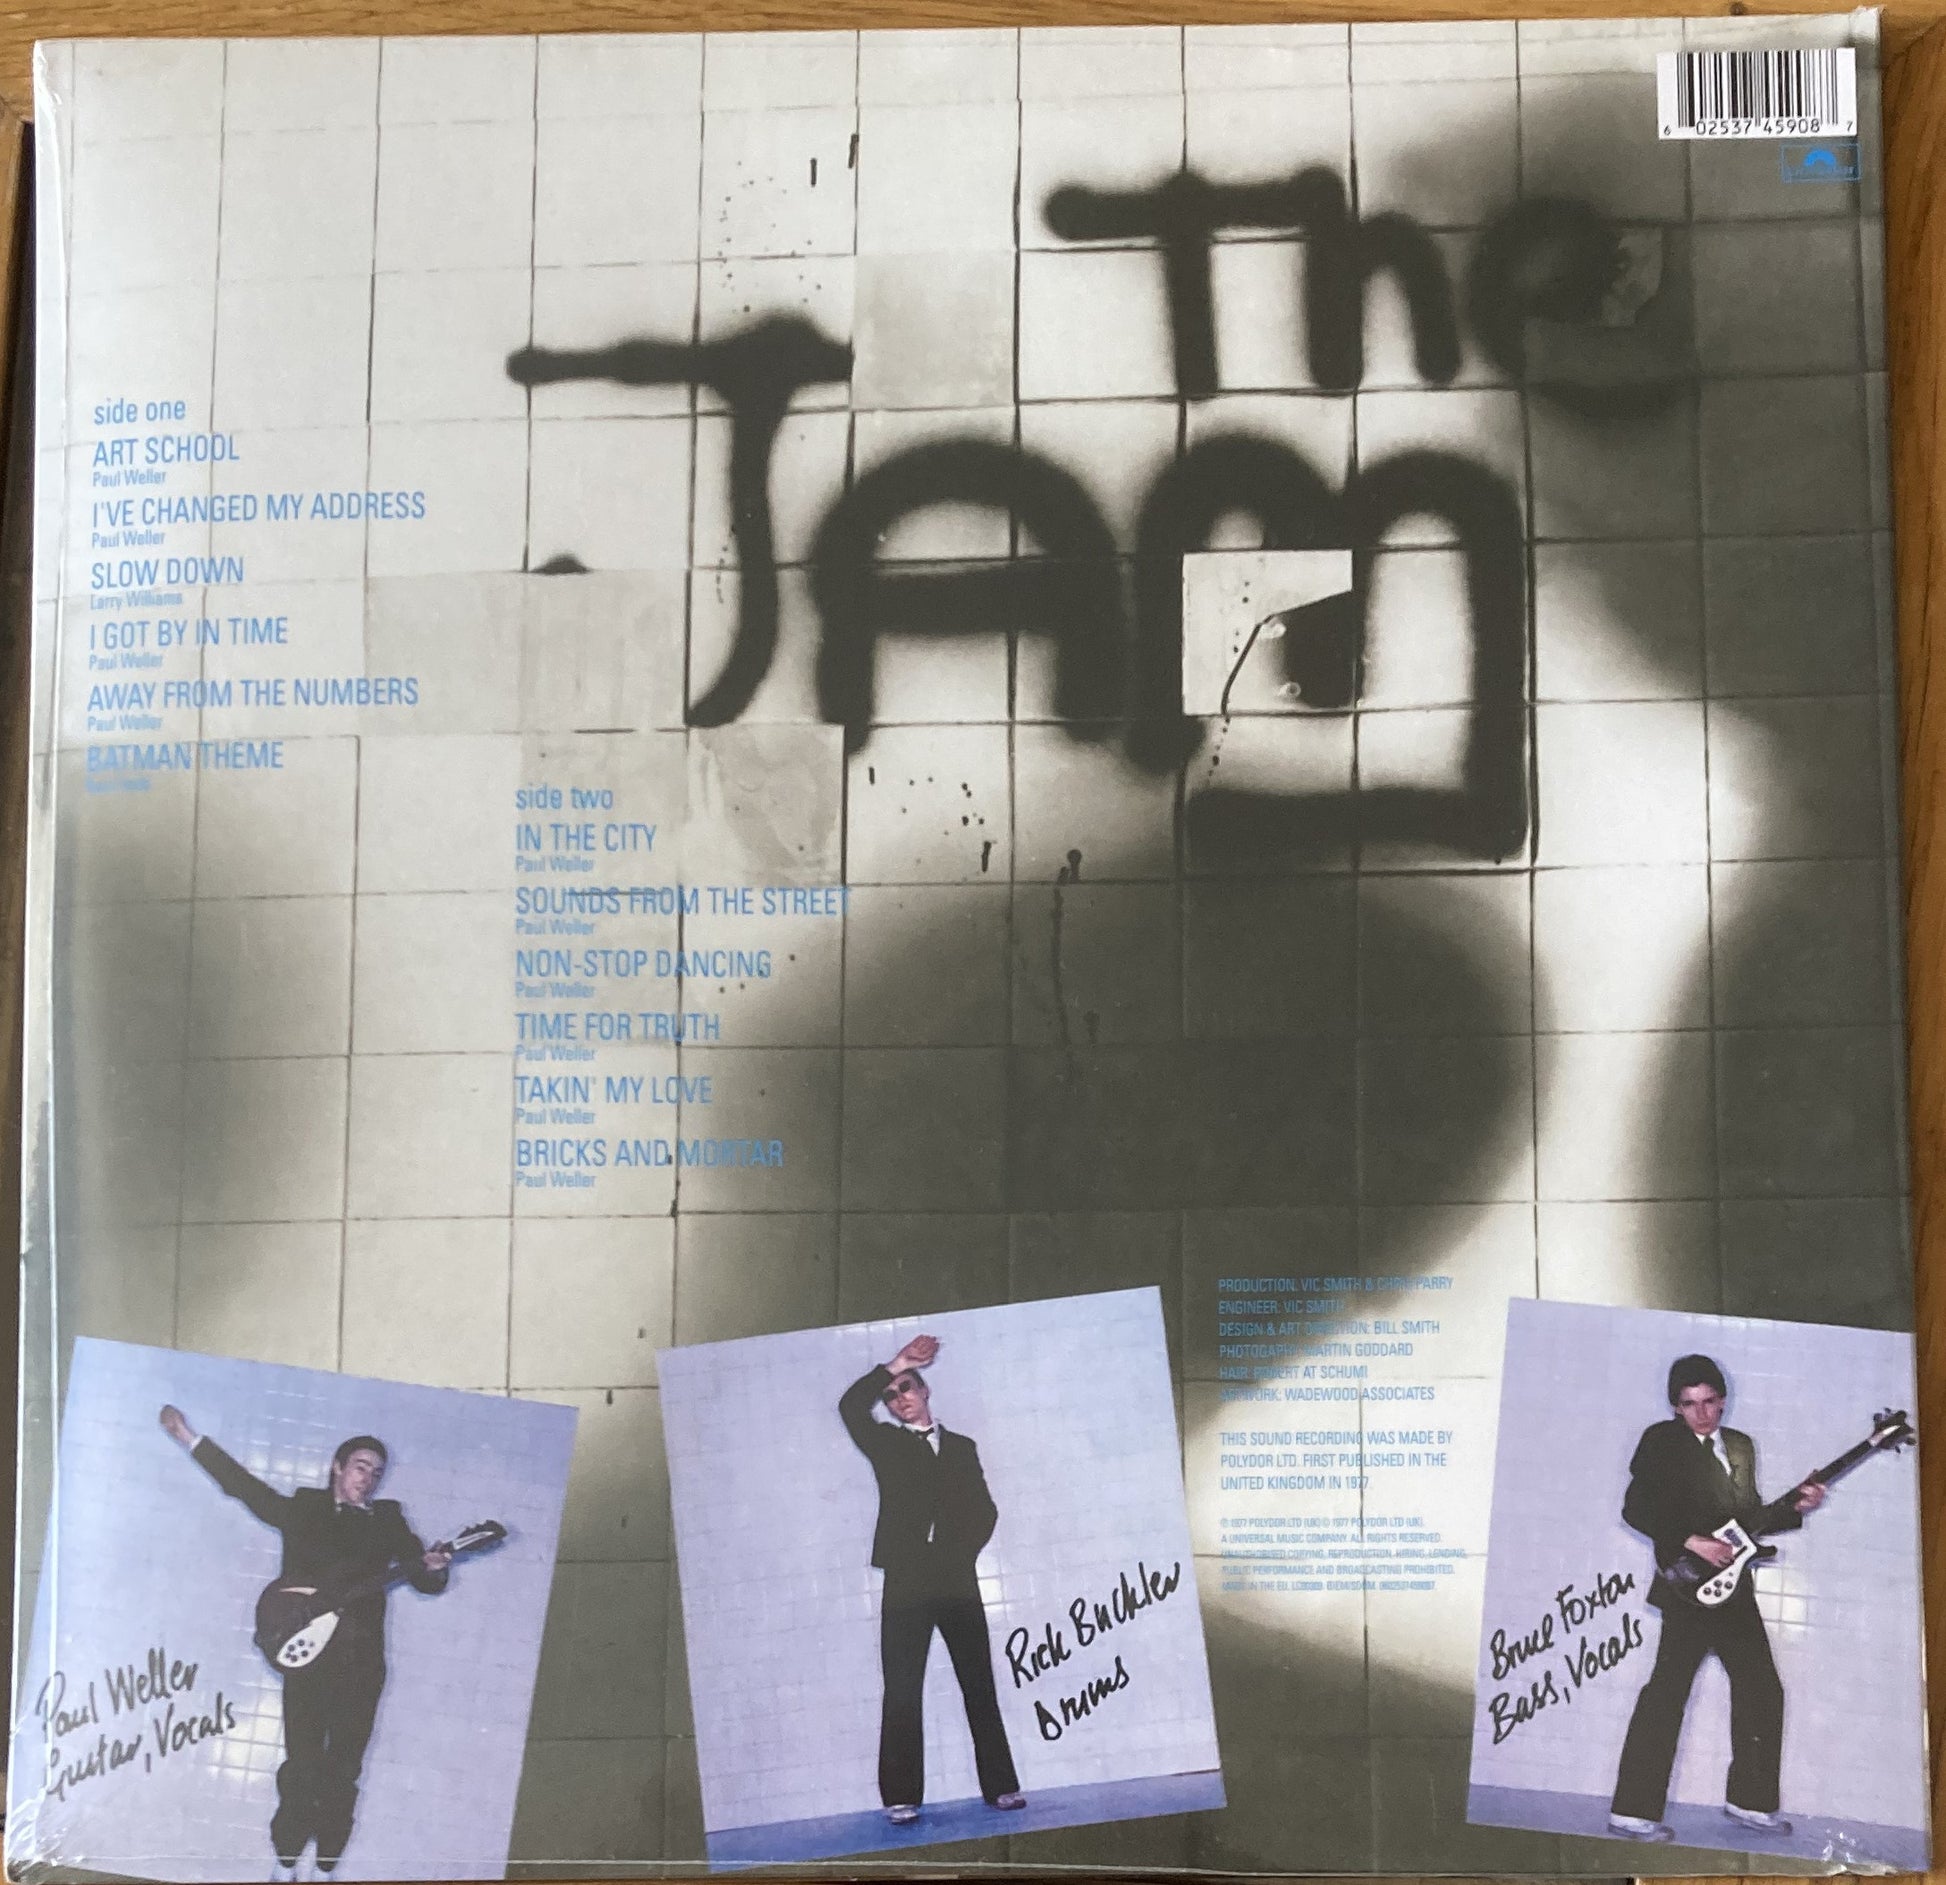 The back of 'The Jam - In the City' on vinyl